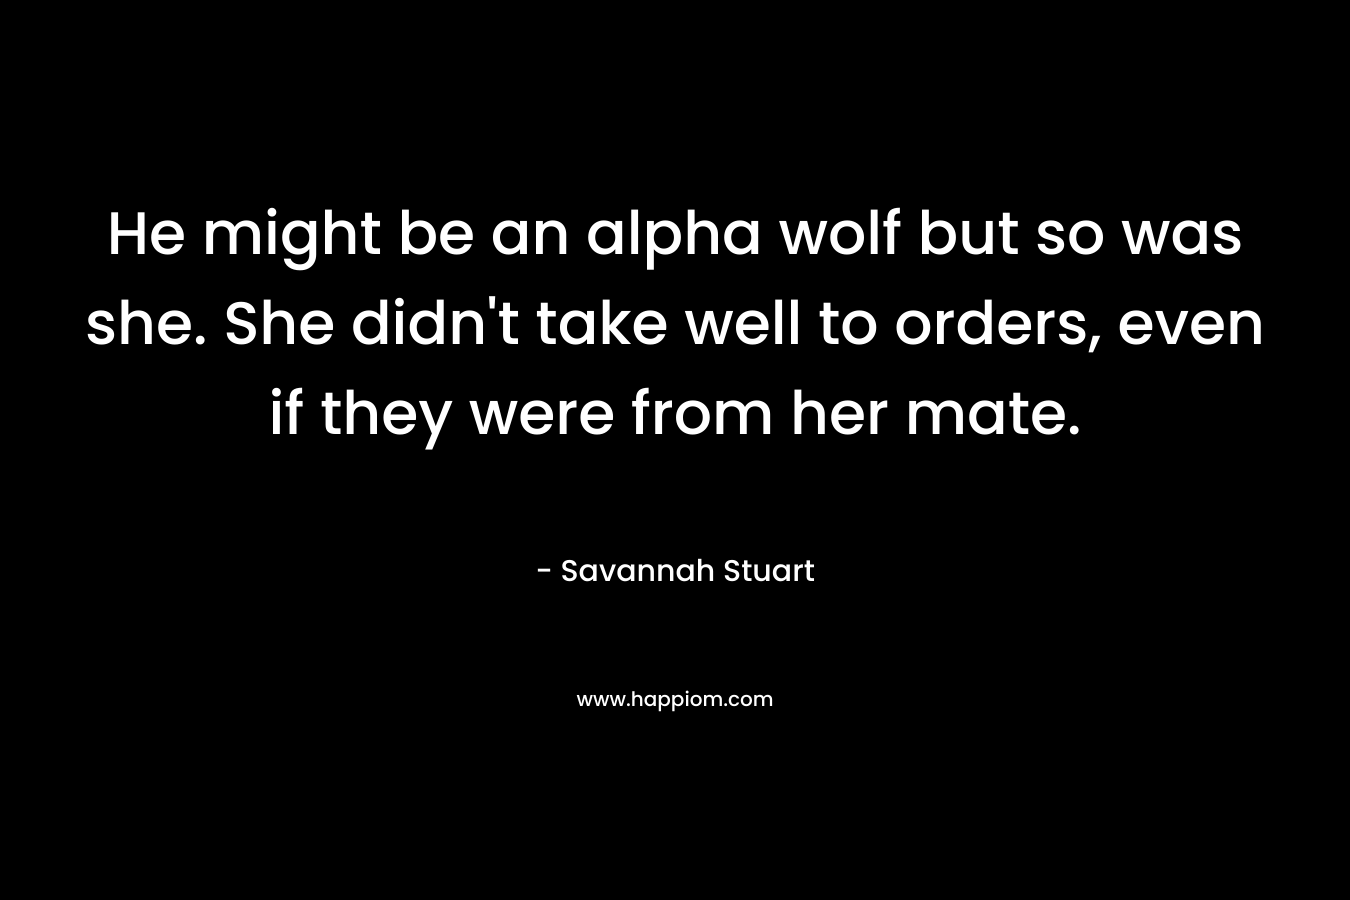 He might be an alpha wolf but so was she. She didn't take well to orders, even if they were from her mate.